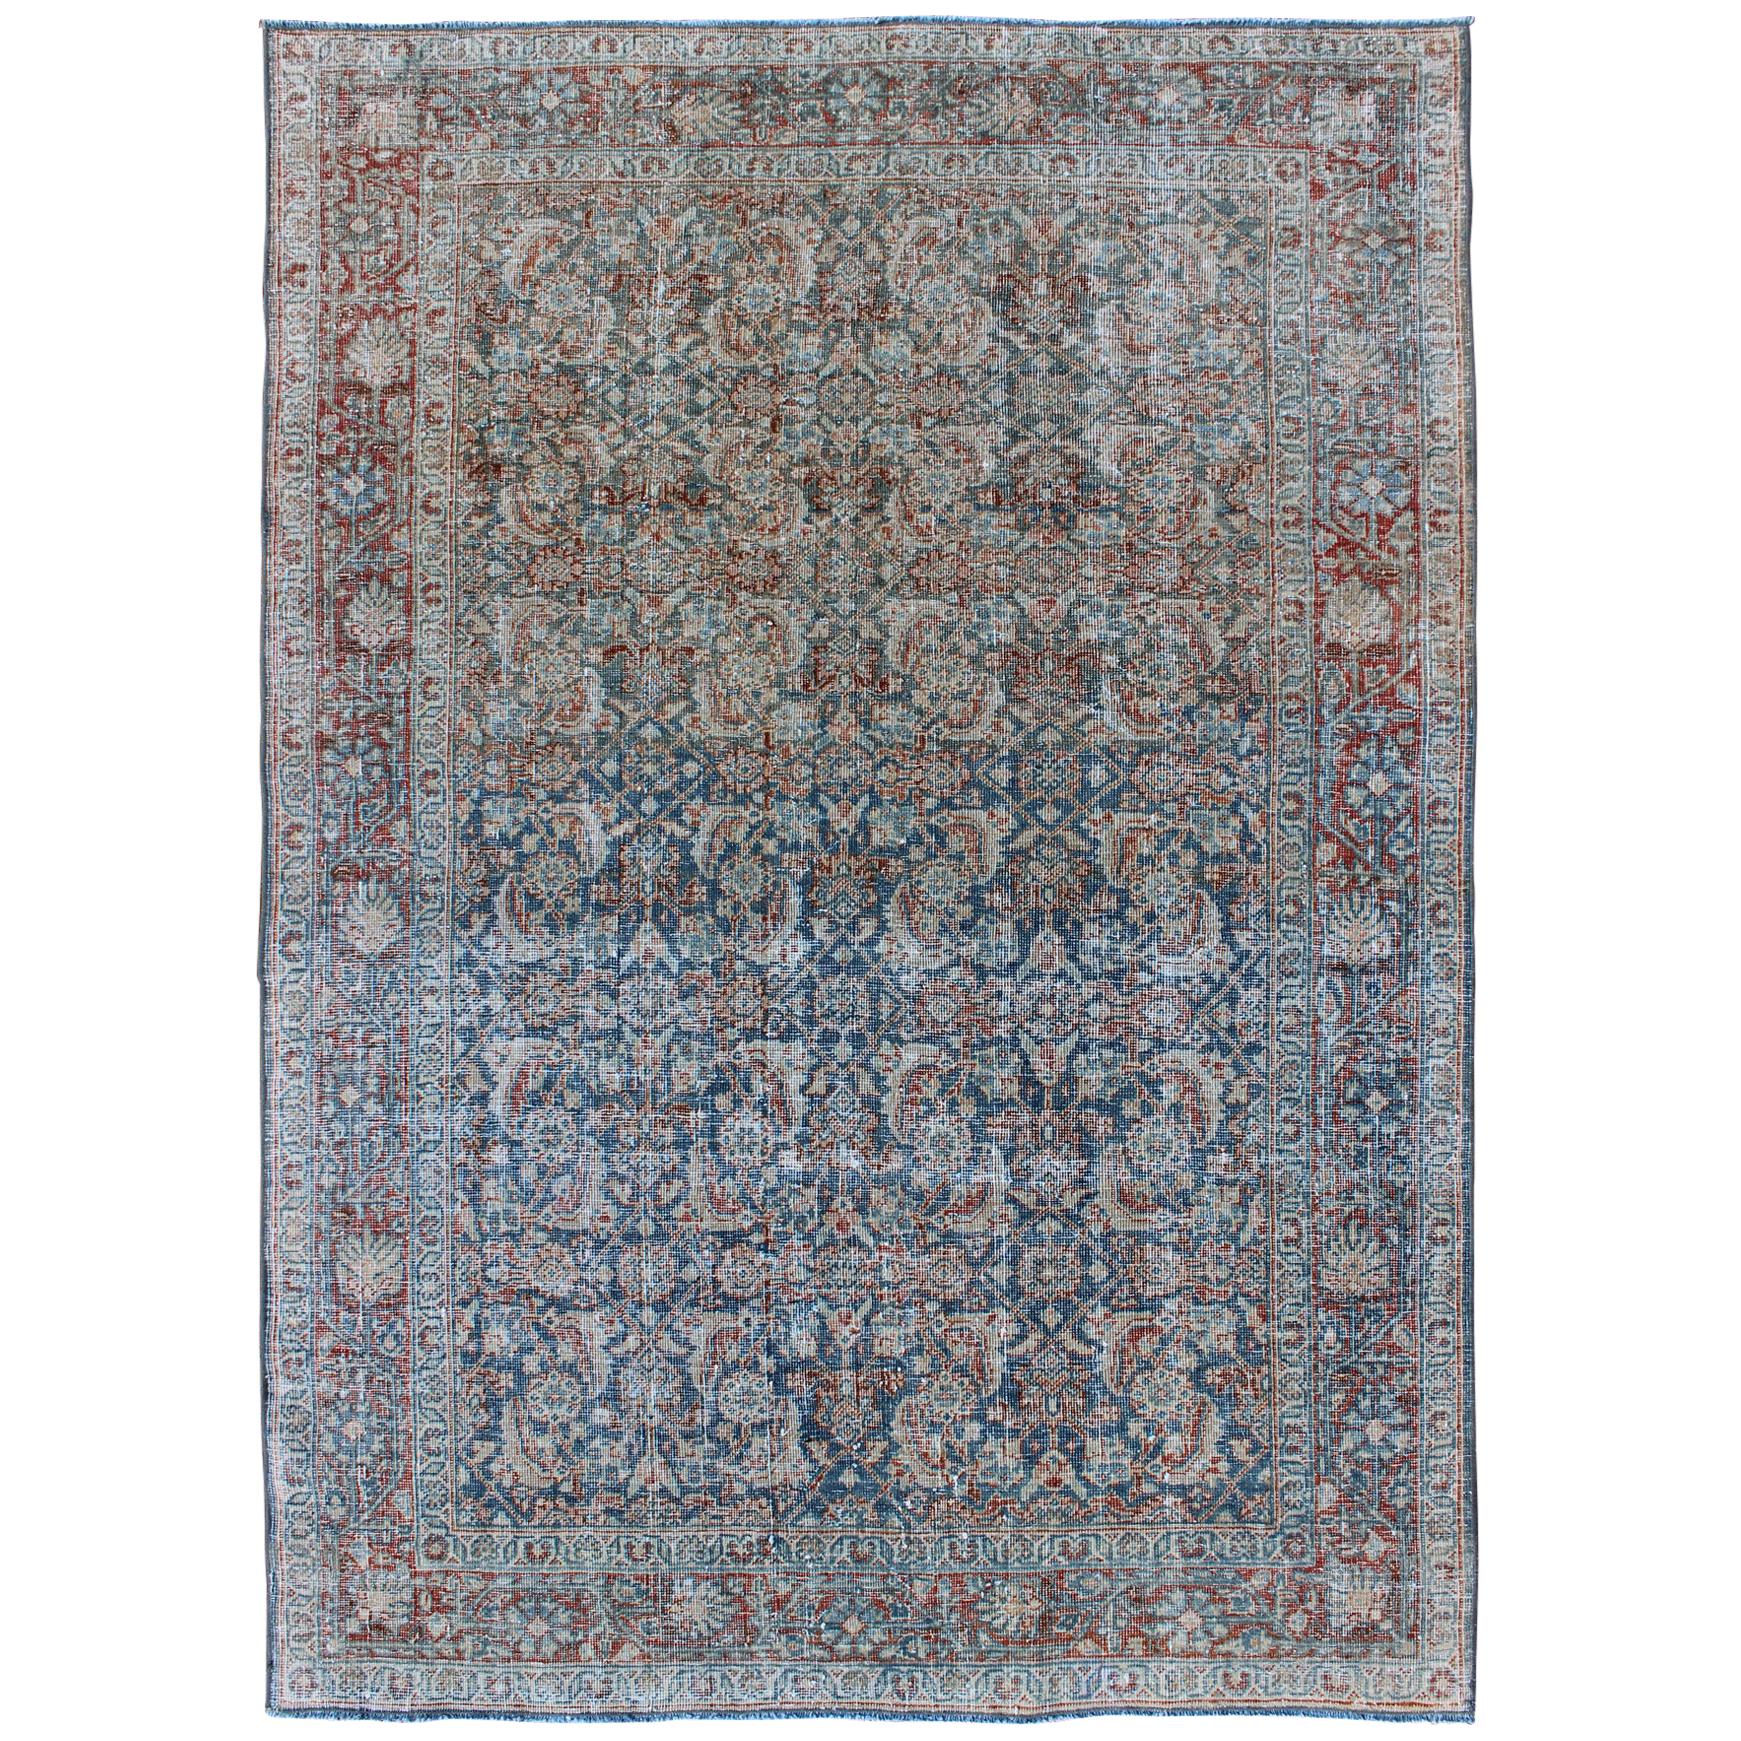 Antique Persian Mahal Rug with All-Over Flower Design in Blue with Red and Ivory